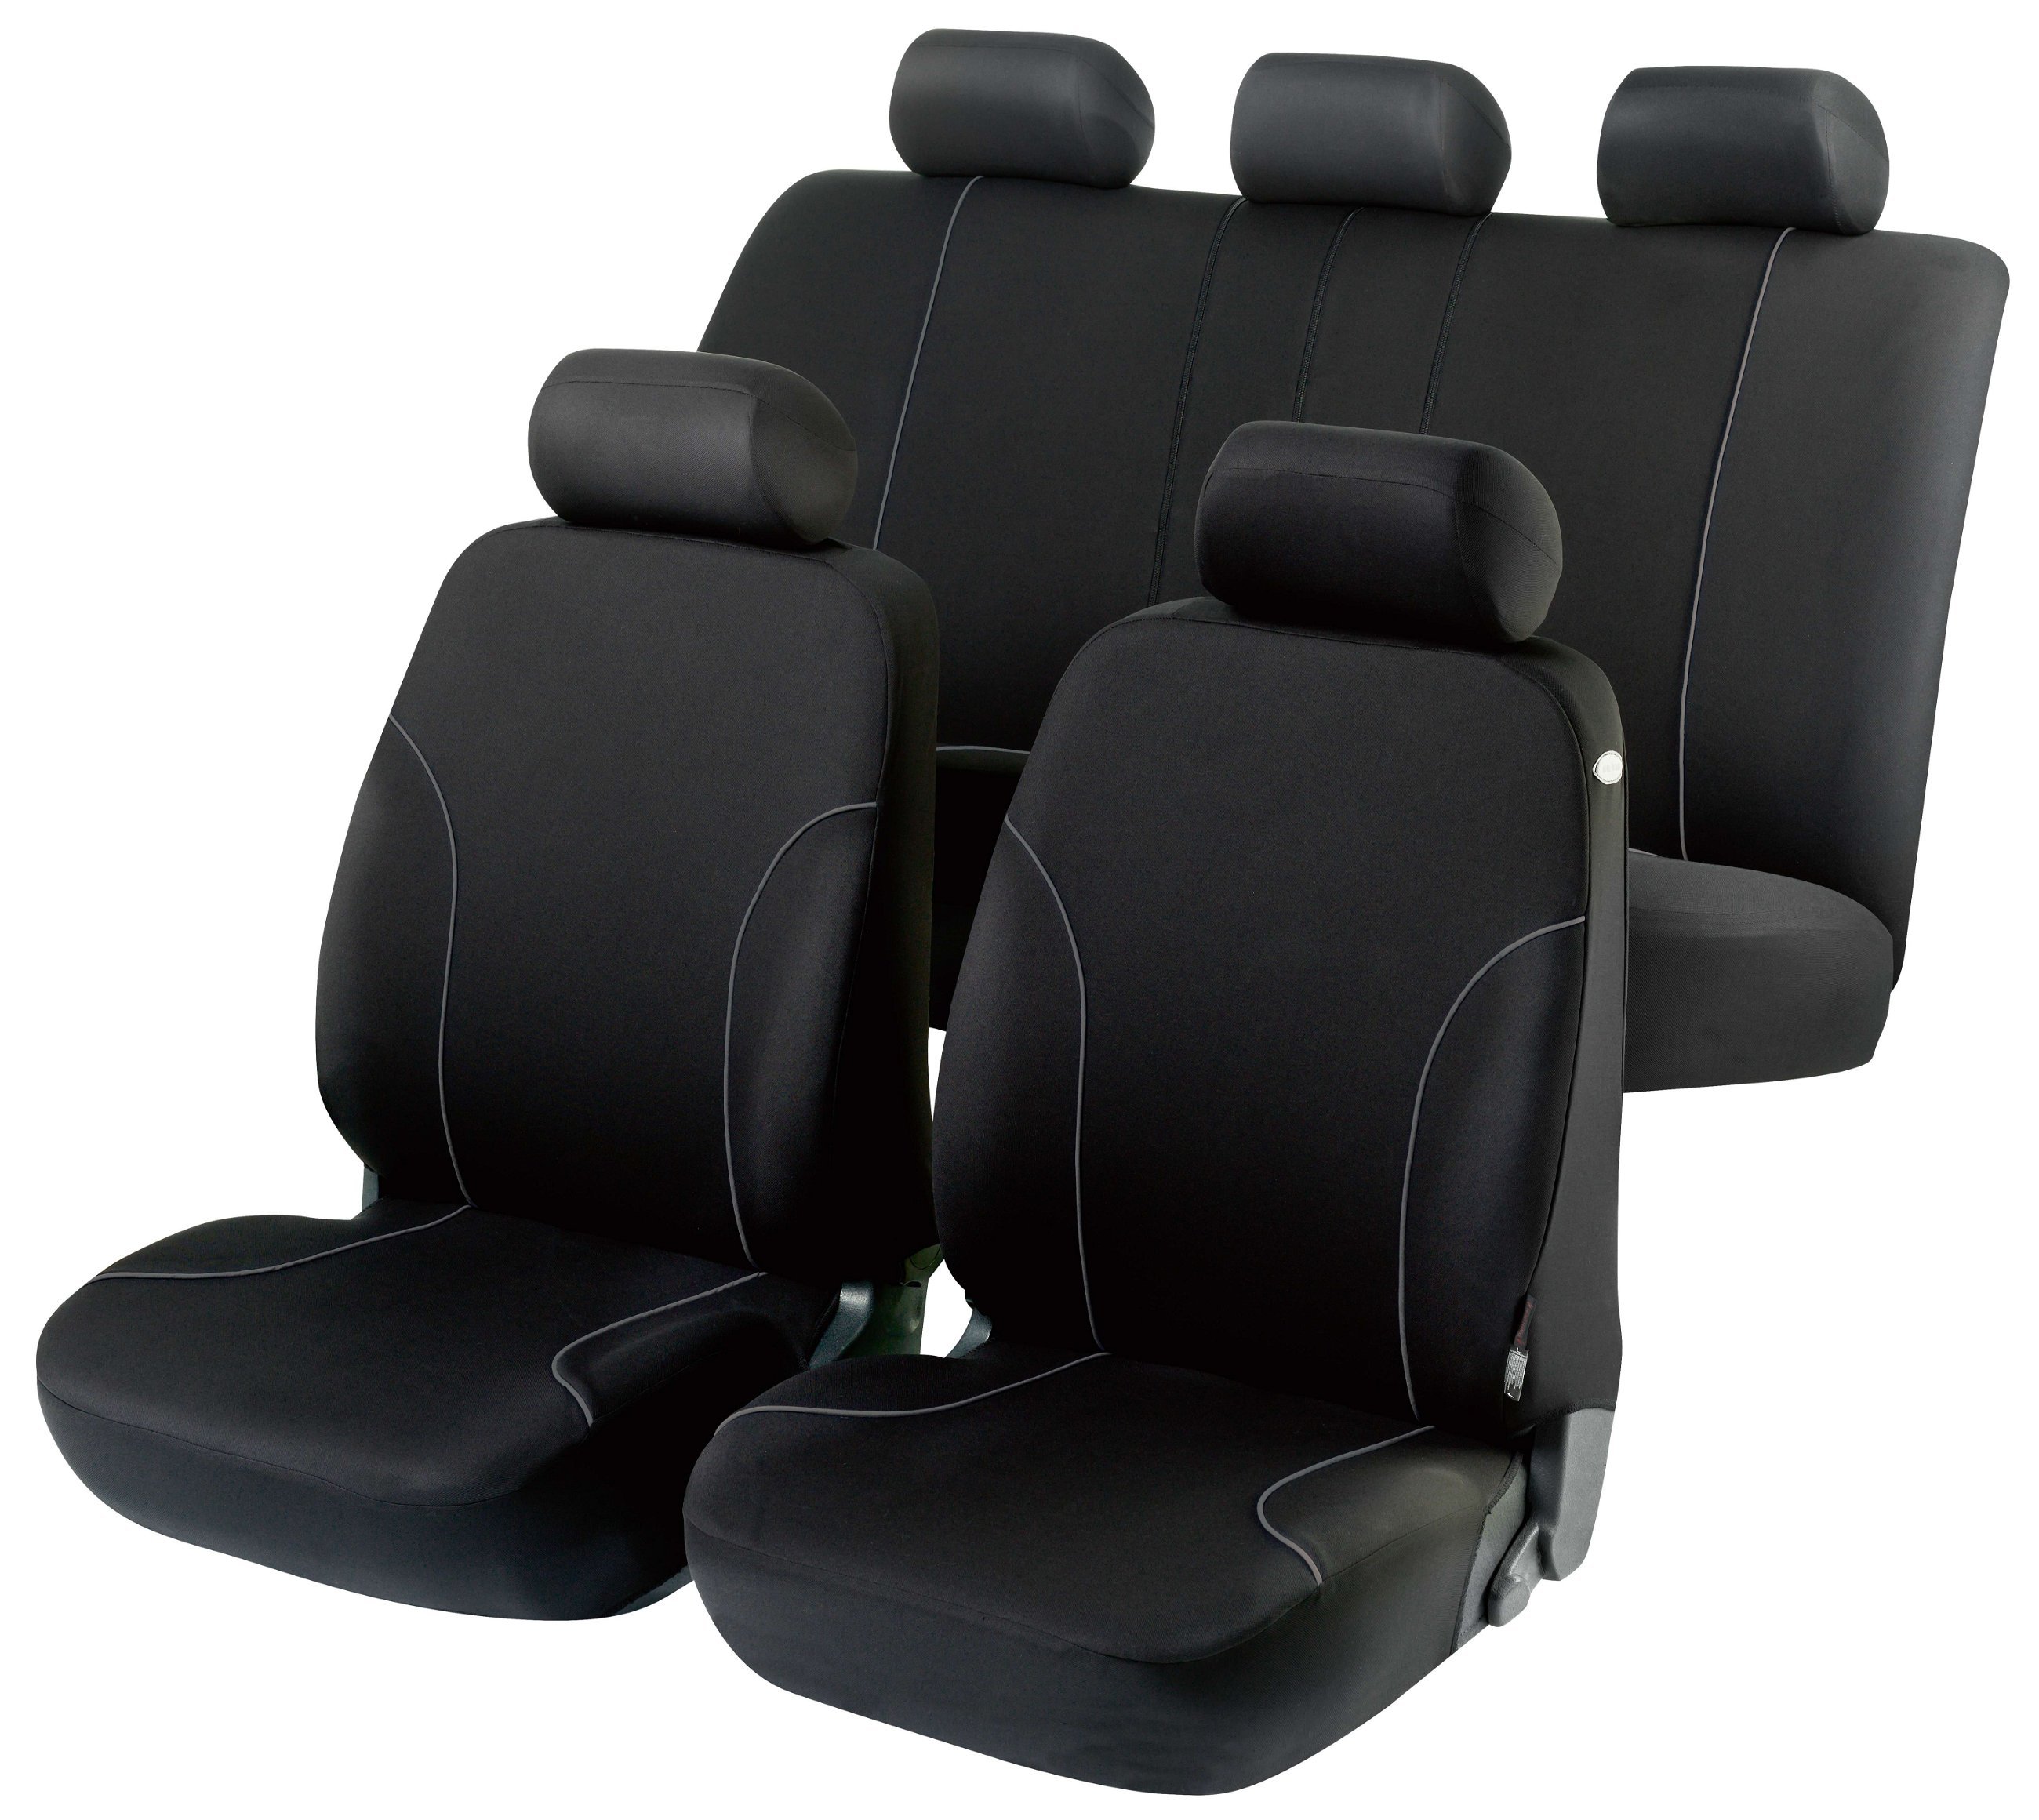 ZIPP-IT Basic Allessandro black car Seat covers with zipper system